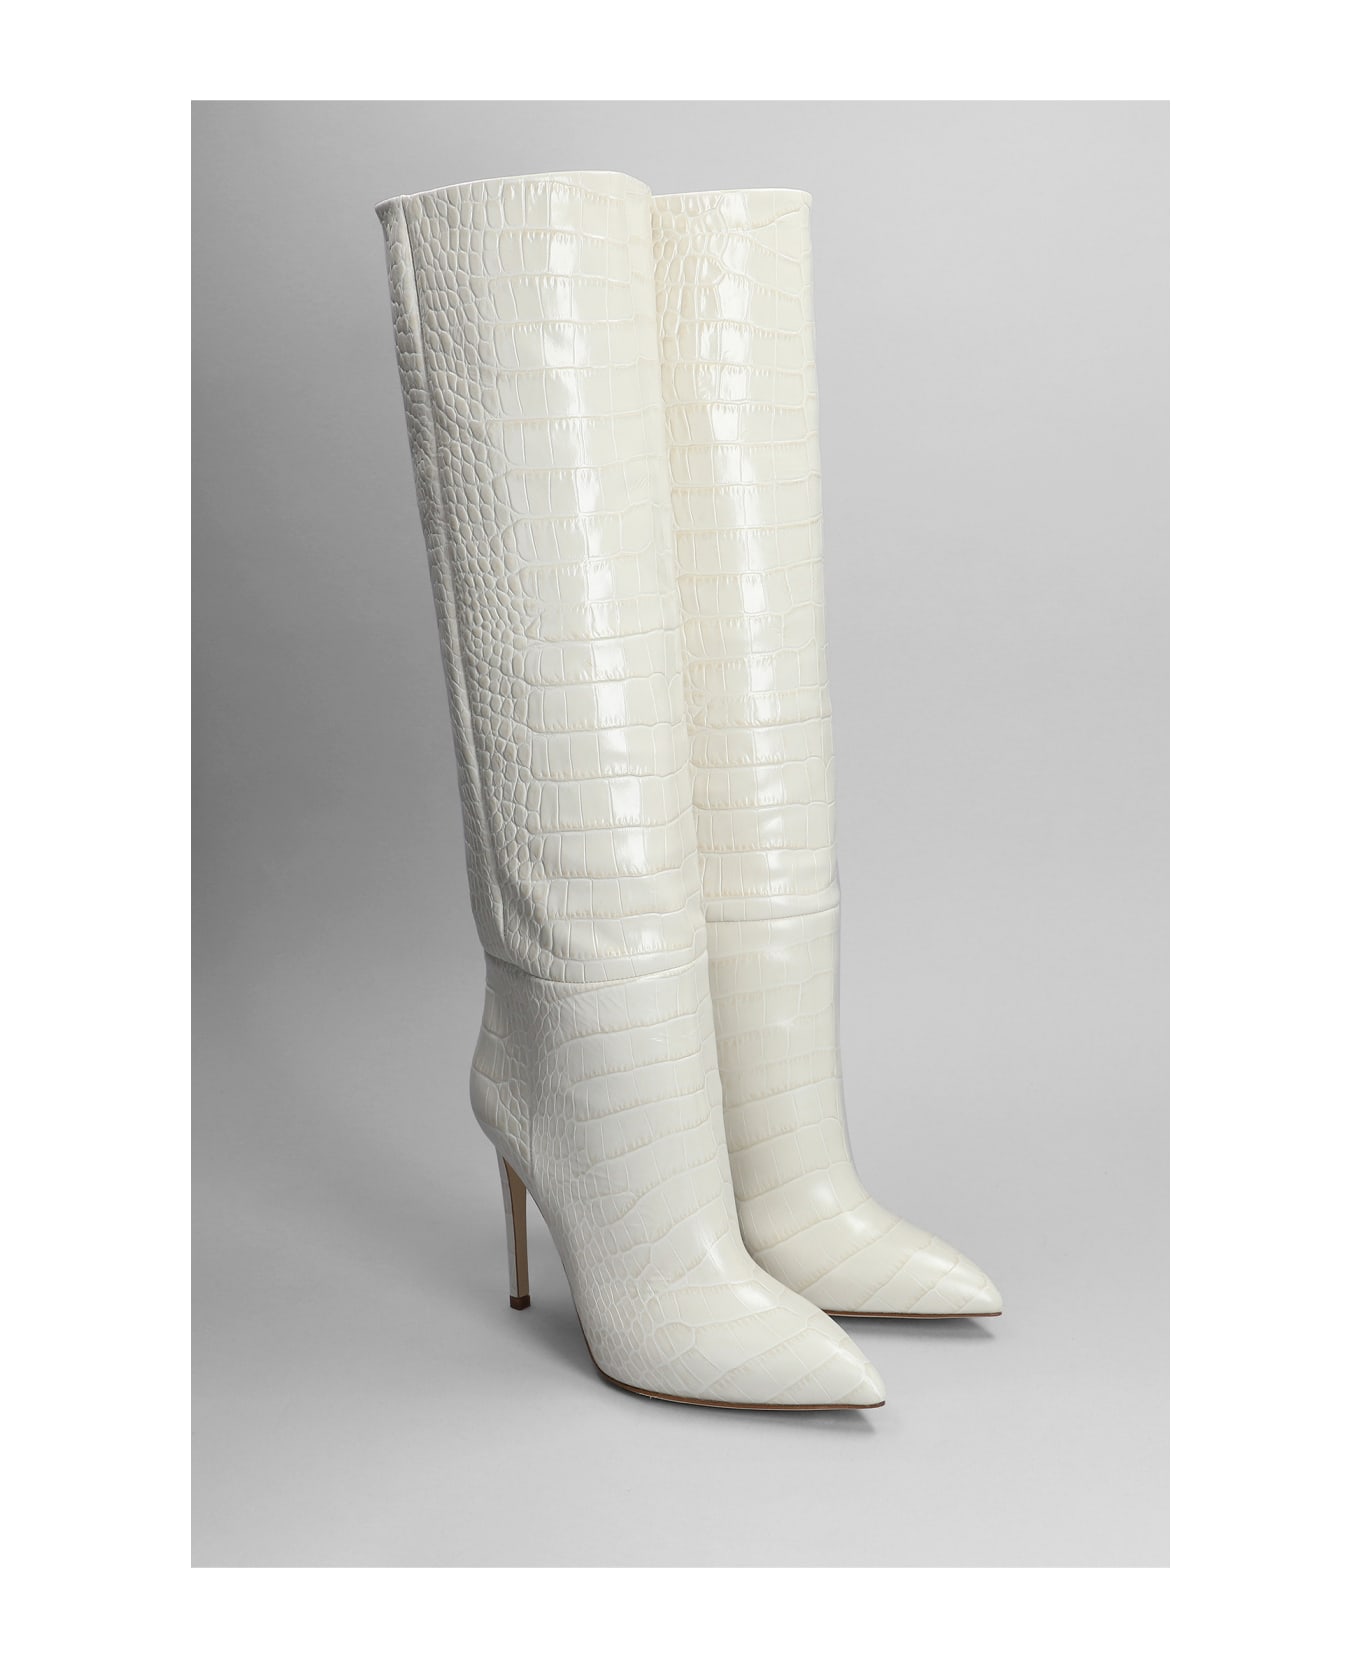 Paris Texas High Heels Boots In White Leather - white ブーツ